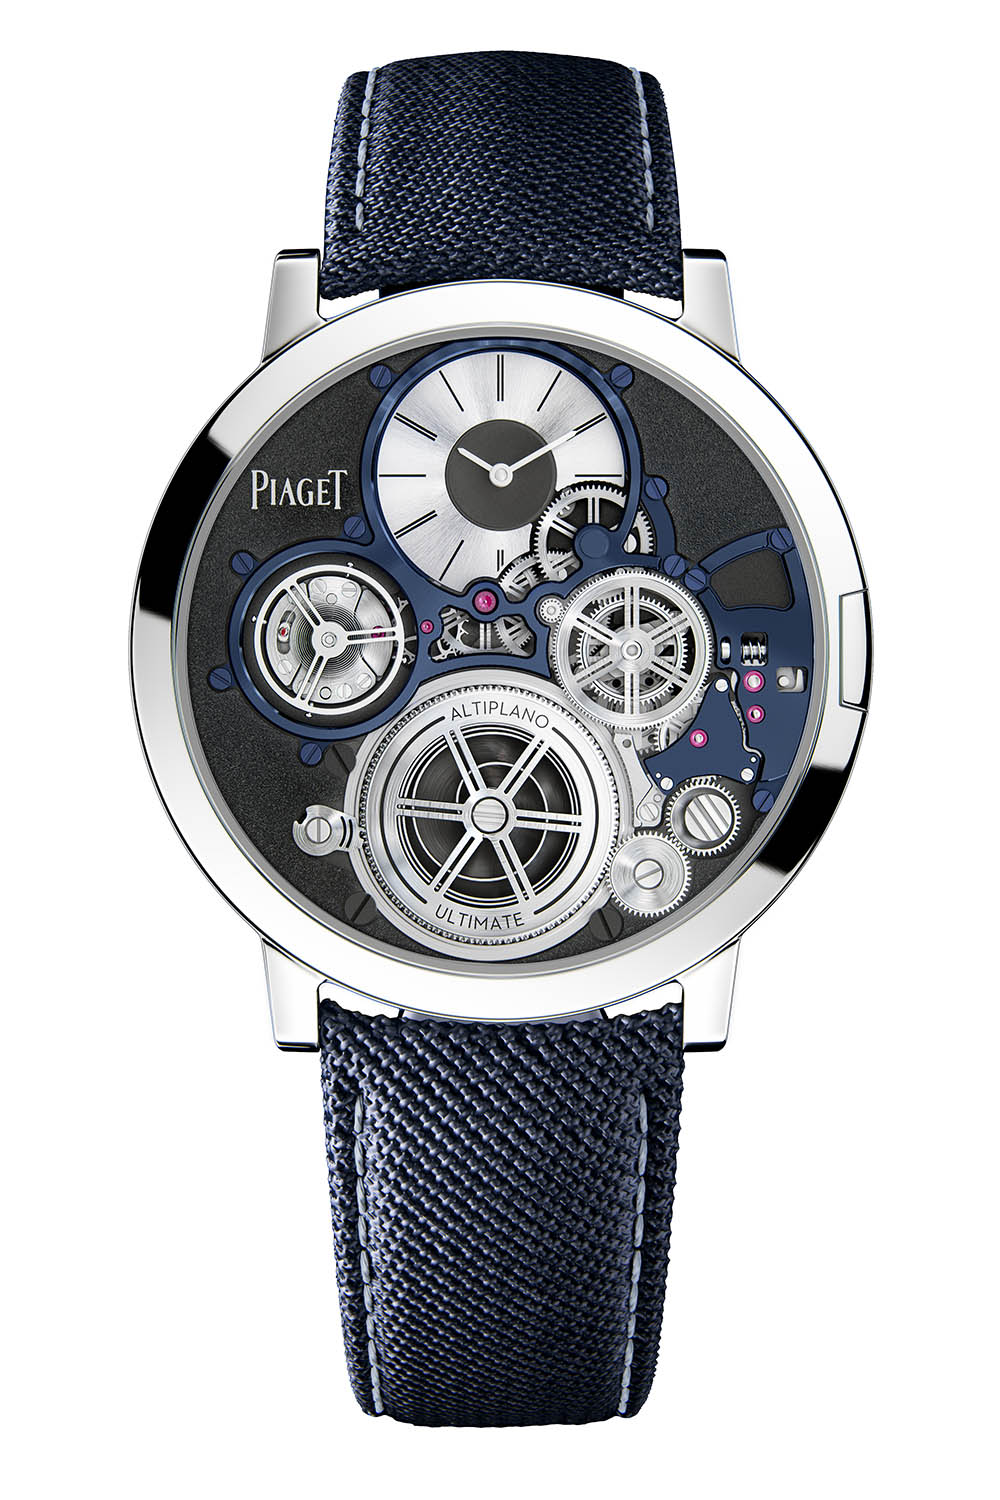 Piaget Altiplano Ultimate Concept 2020 - 6